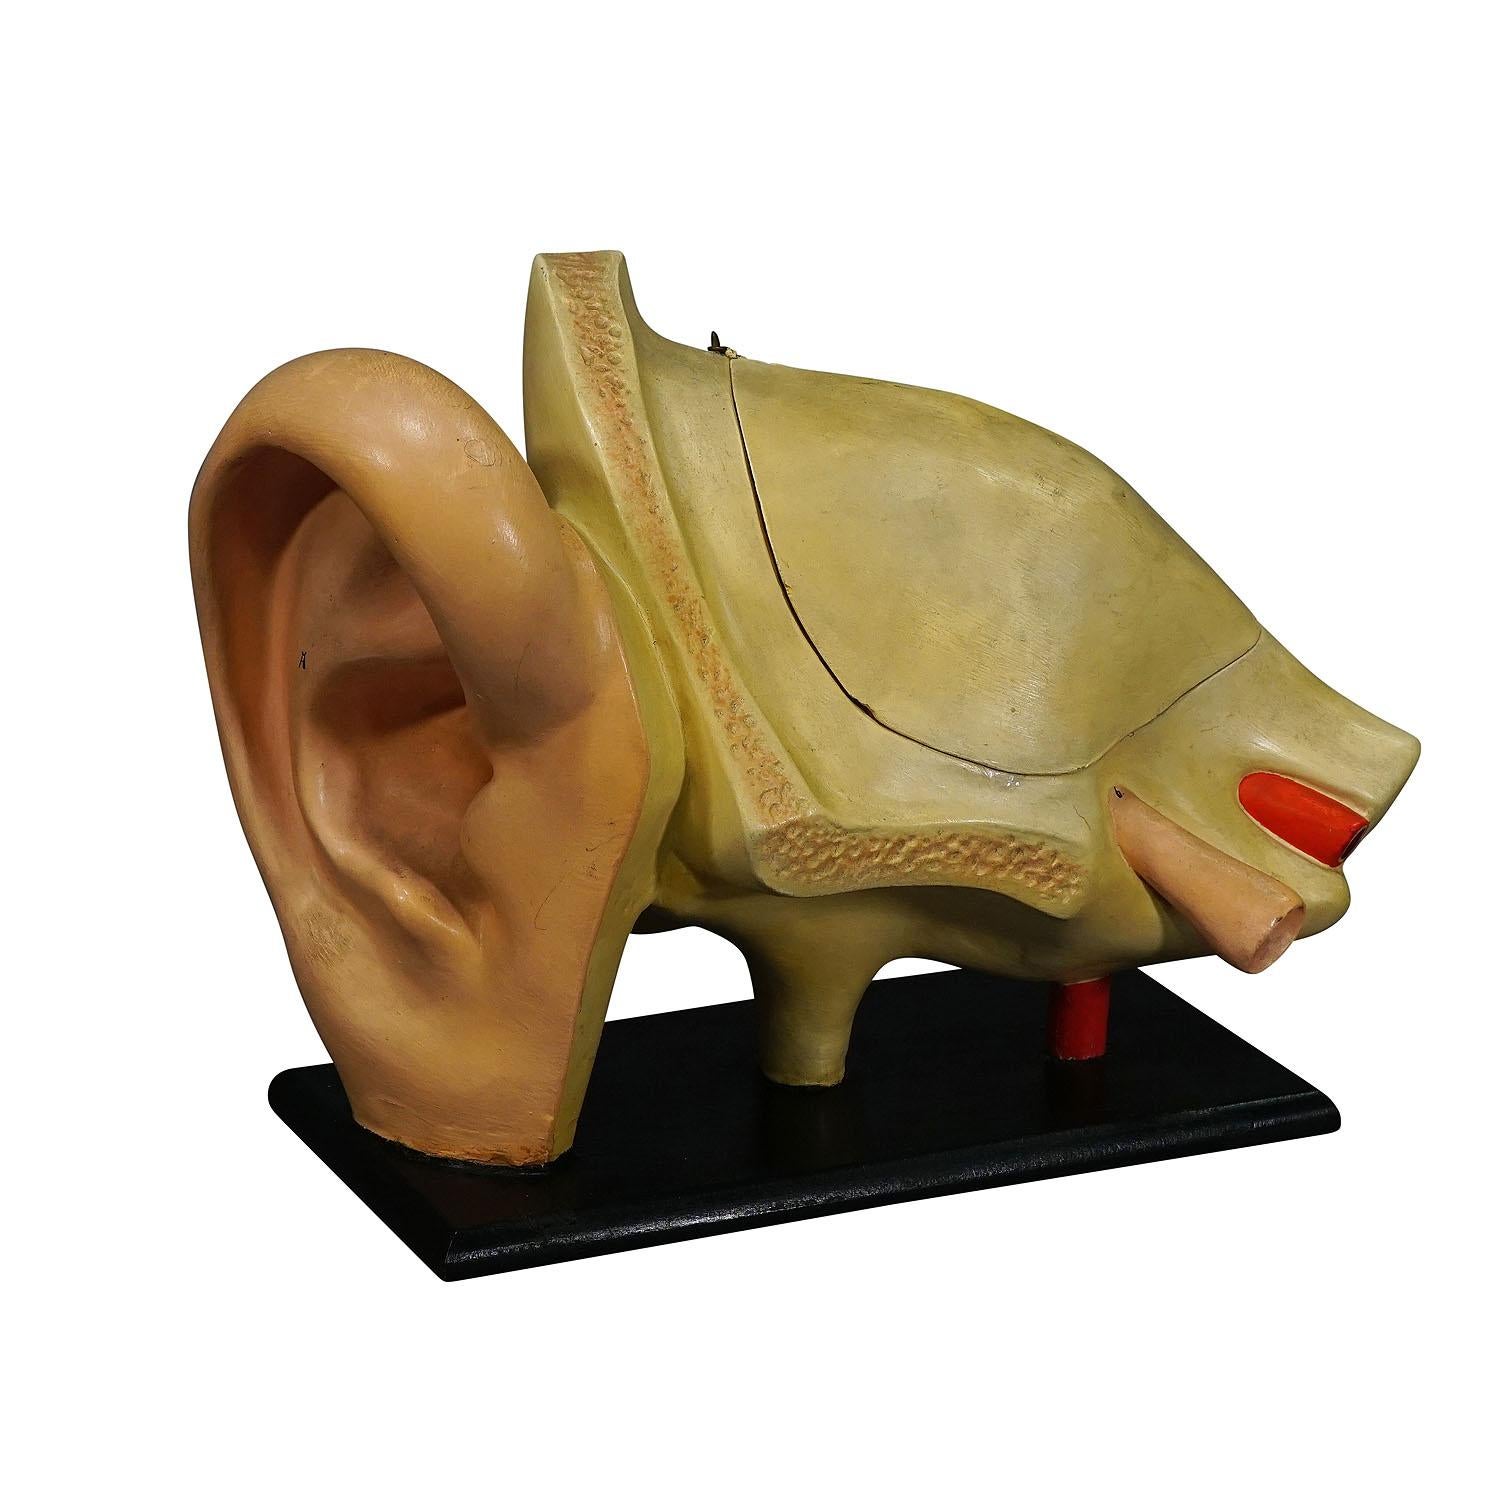 Antique Teaching Aid Modell of an Ear - Somso ca. 1900

A folding model of an ear. It was used as teaching material in German schools ca. 1900. It is made of wood and paper mache by Somso, Germany.

artfour is an owner-managed trading company that